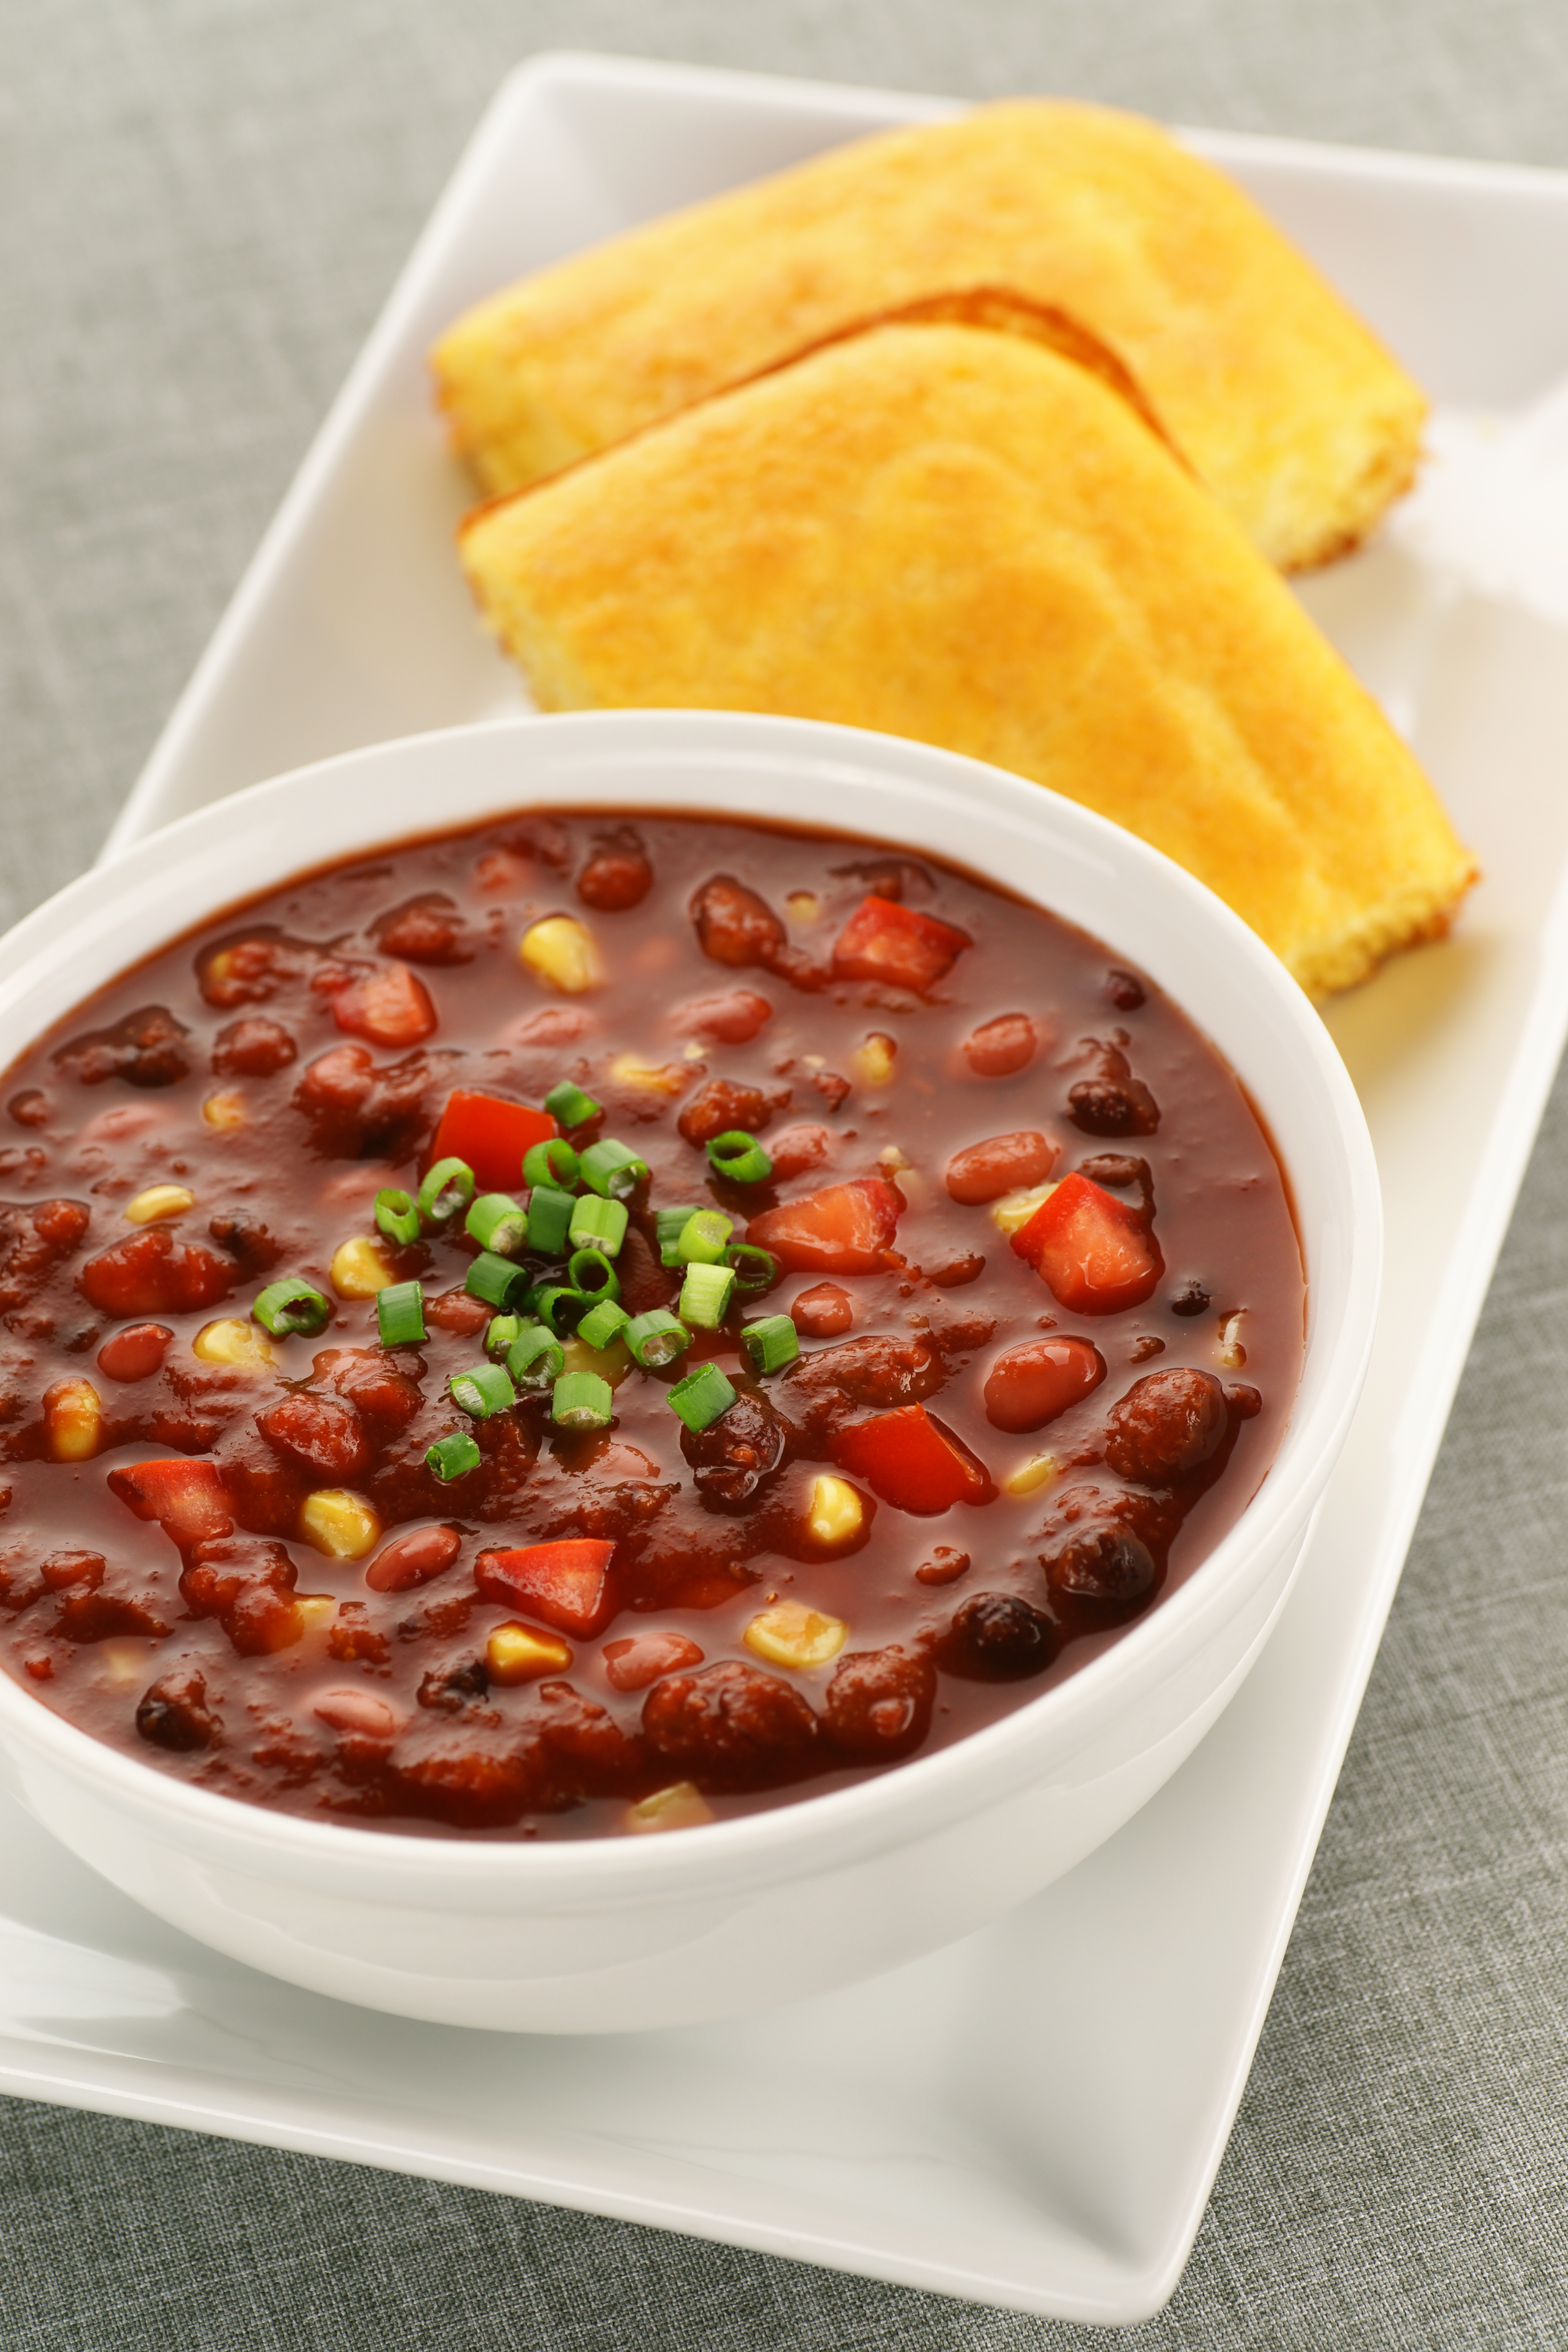 Meal Makeover: Fall Comfort Food (Vegetarian Chili and Cornbread)